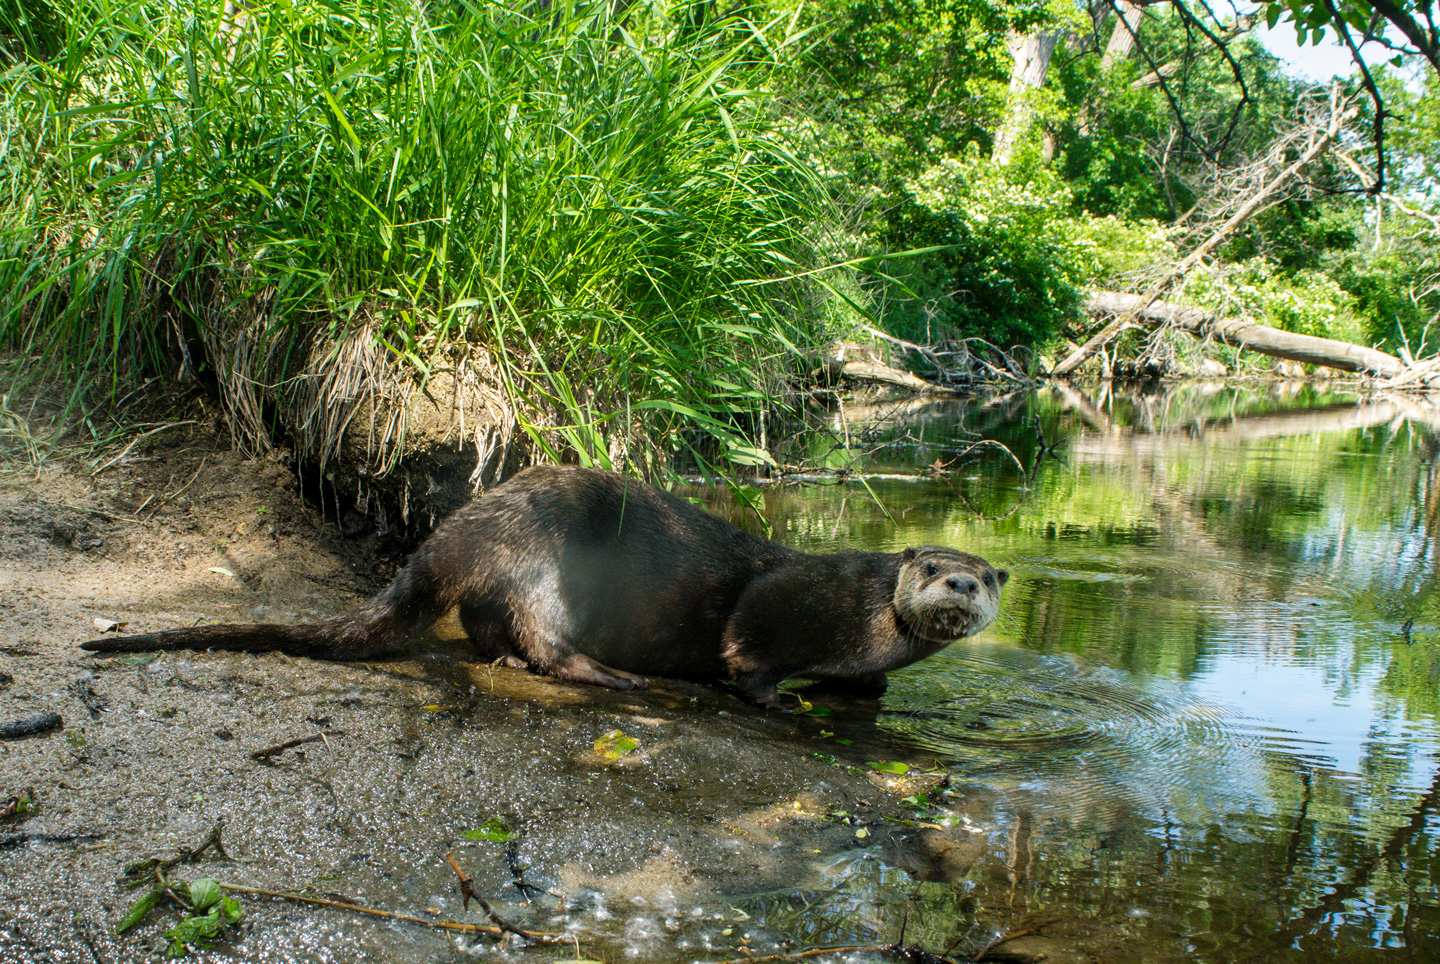 Read More: Otter Trapping